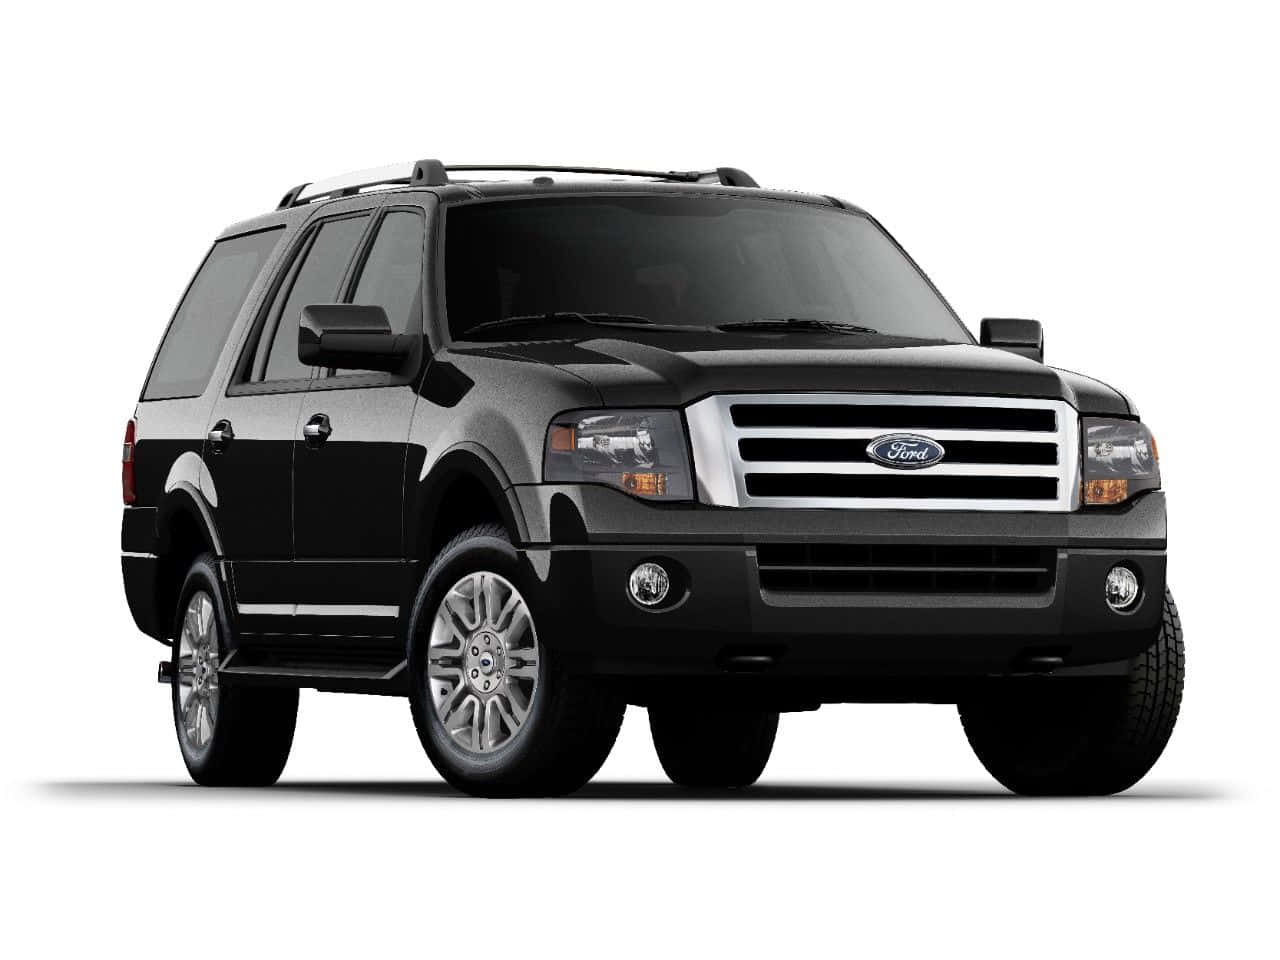 Powerful and Sophisticated Ford Expedition SUV Wallpaper